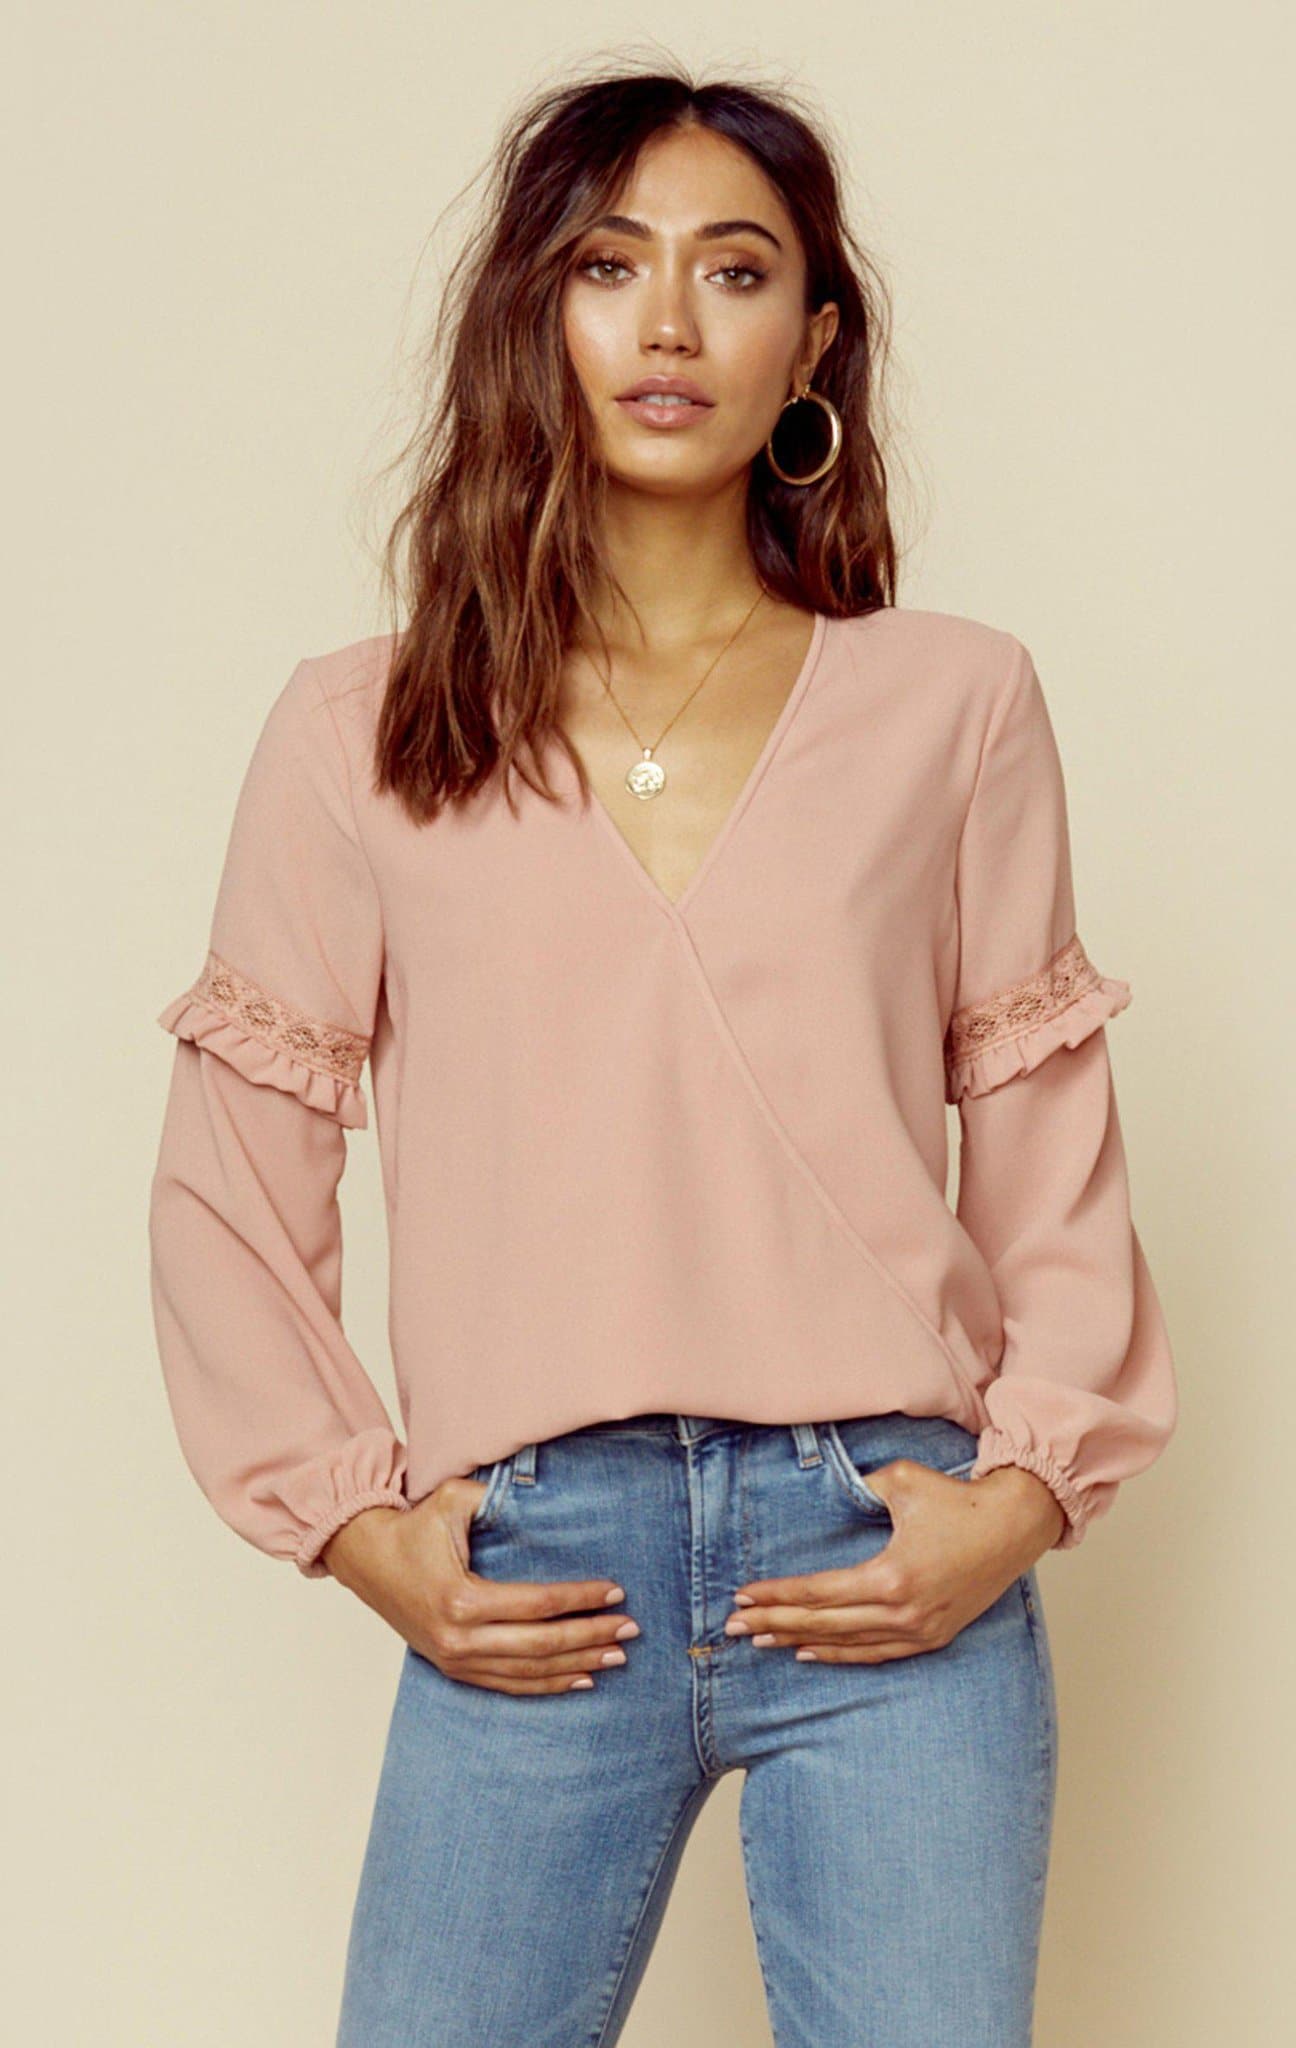 BLUE LIFE HOLLY TOP - IVORY